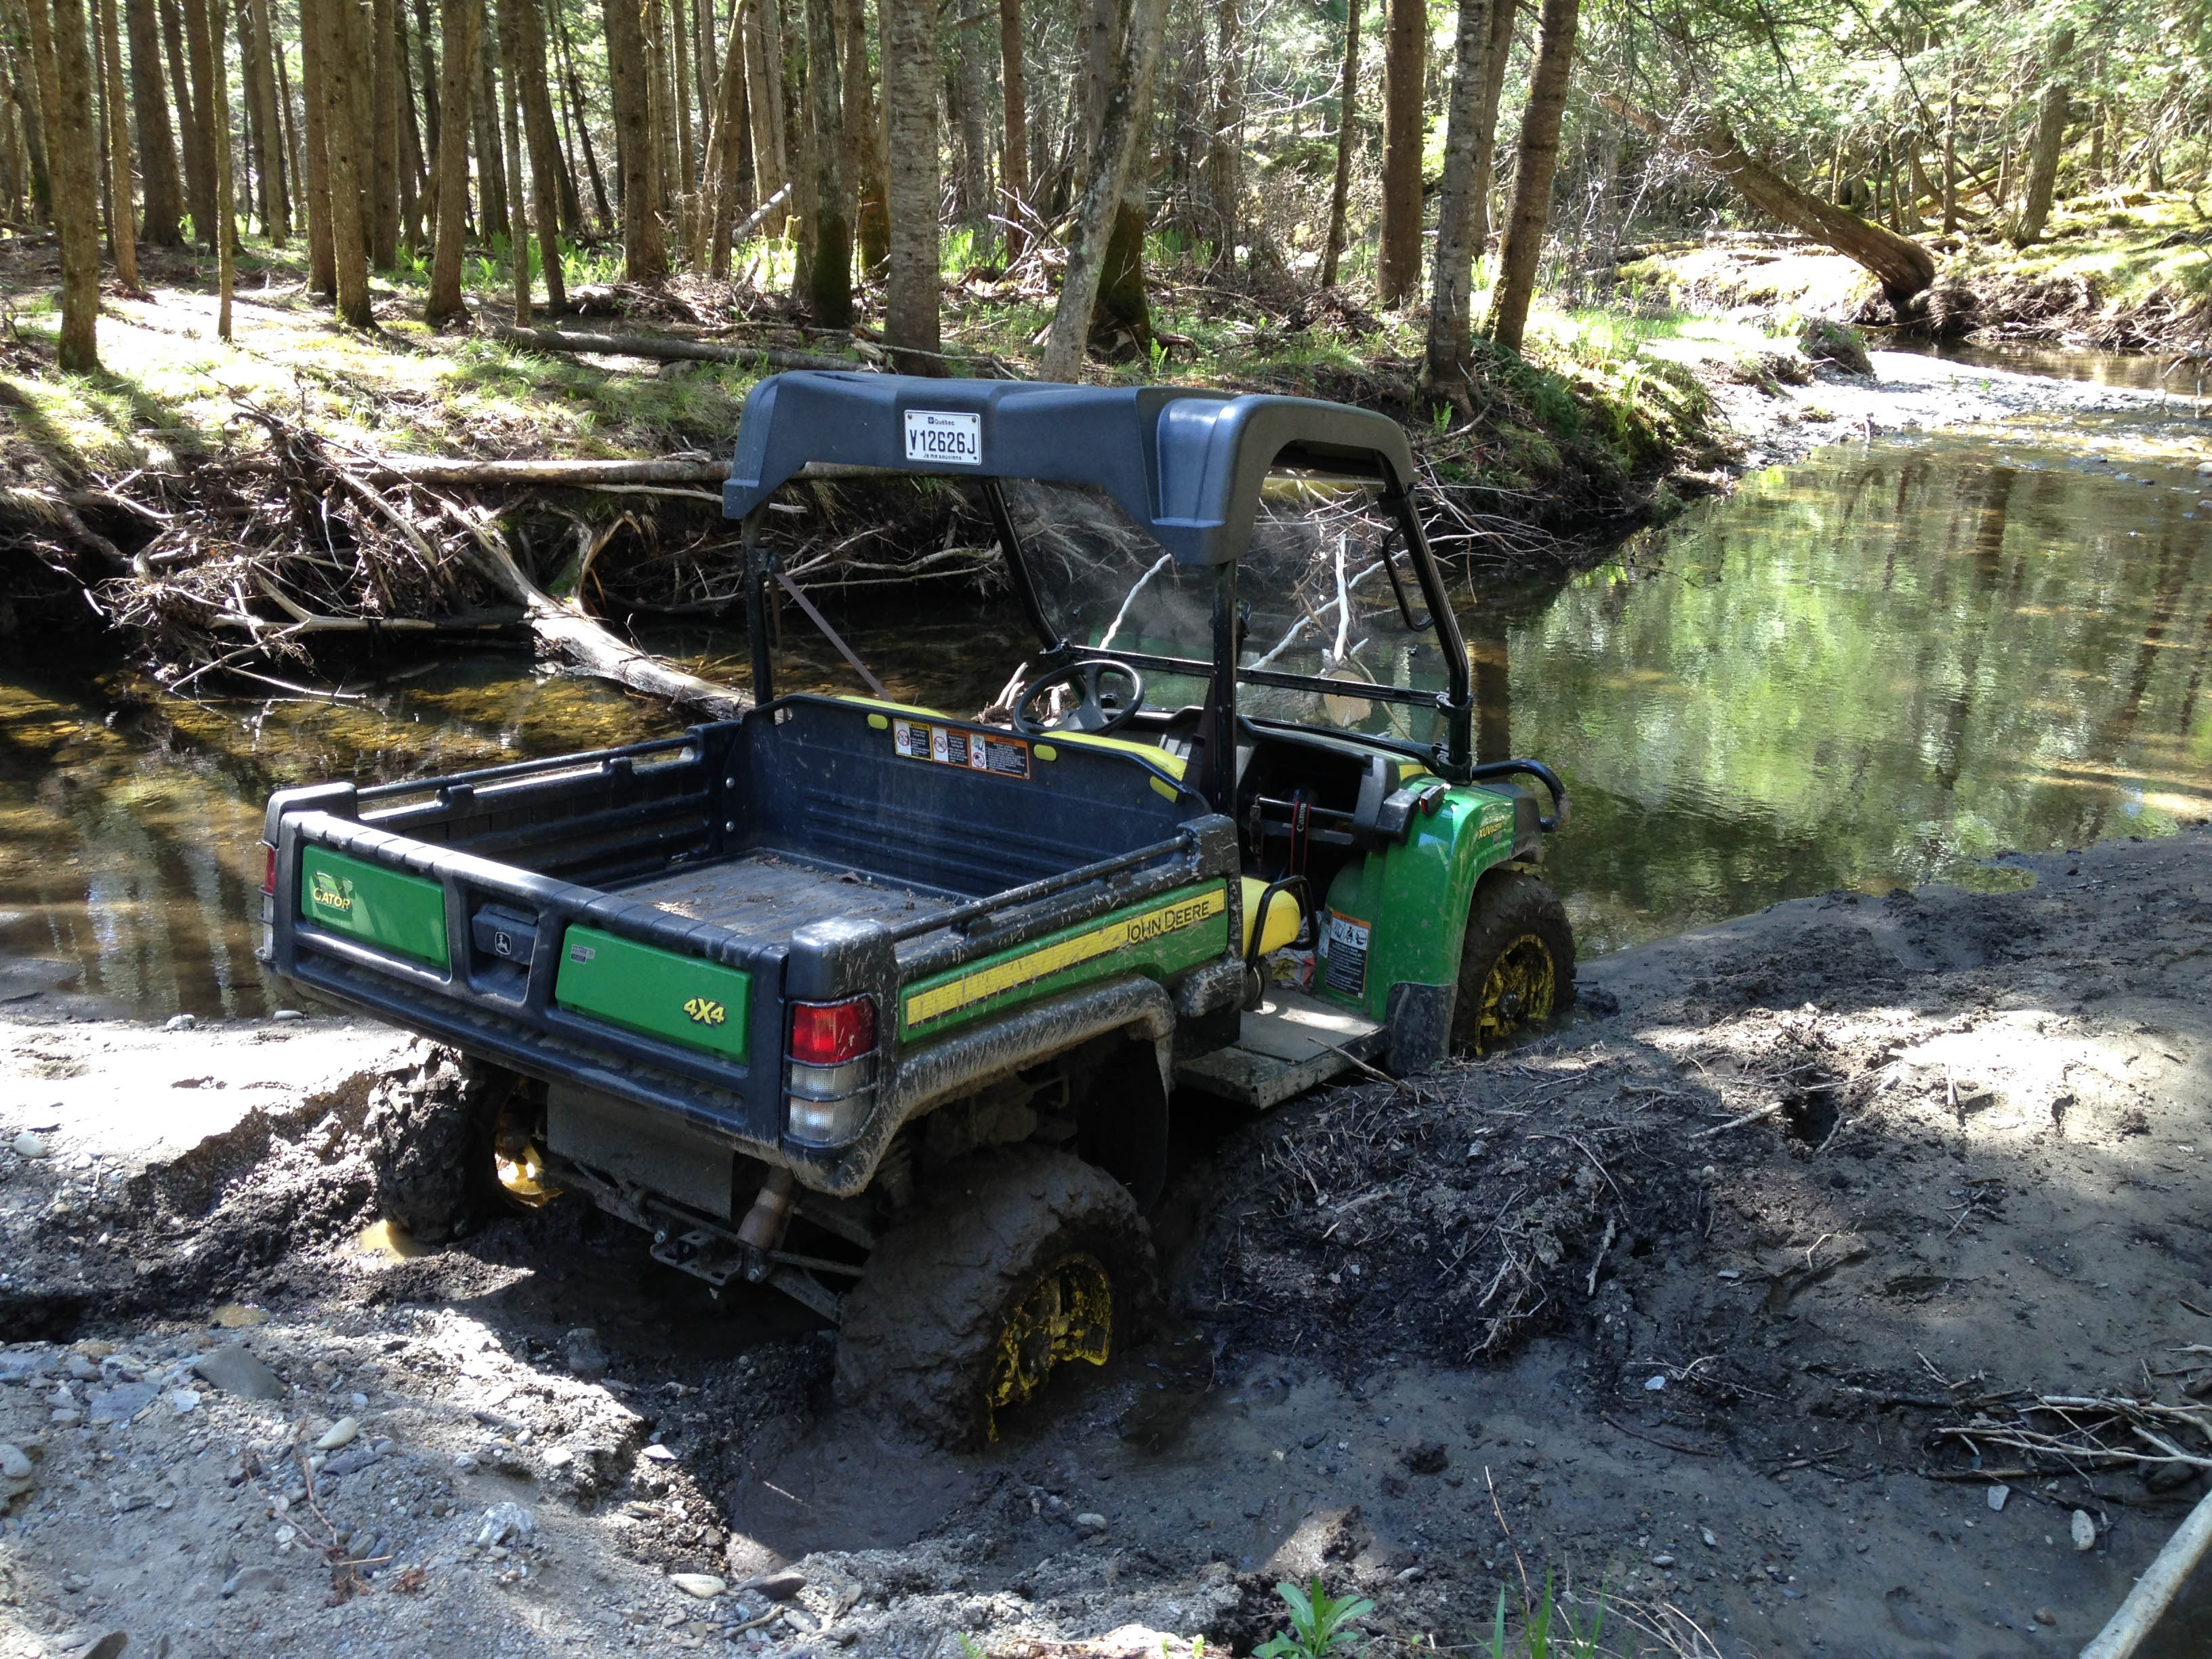 A John Deere Gator can do many things but not when it is stuck in the mud.